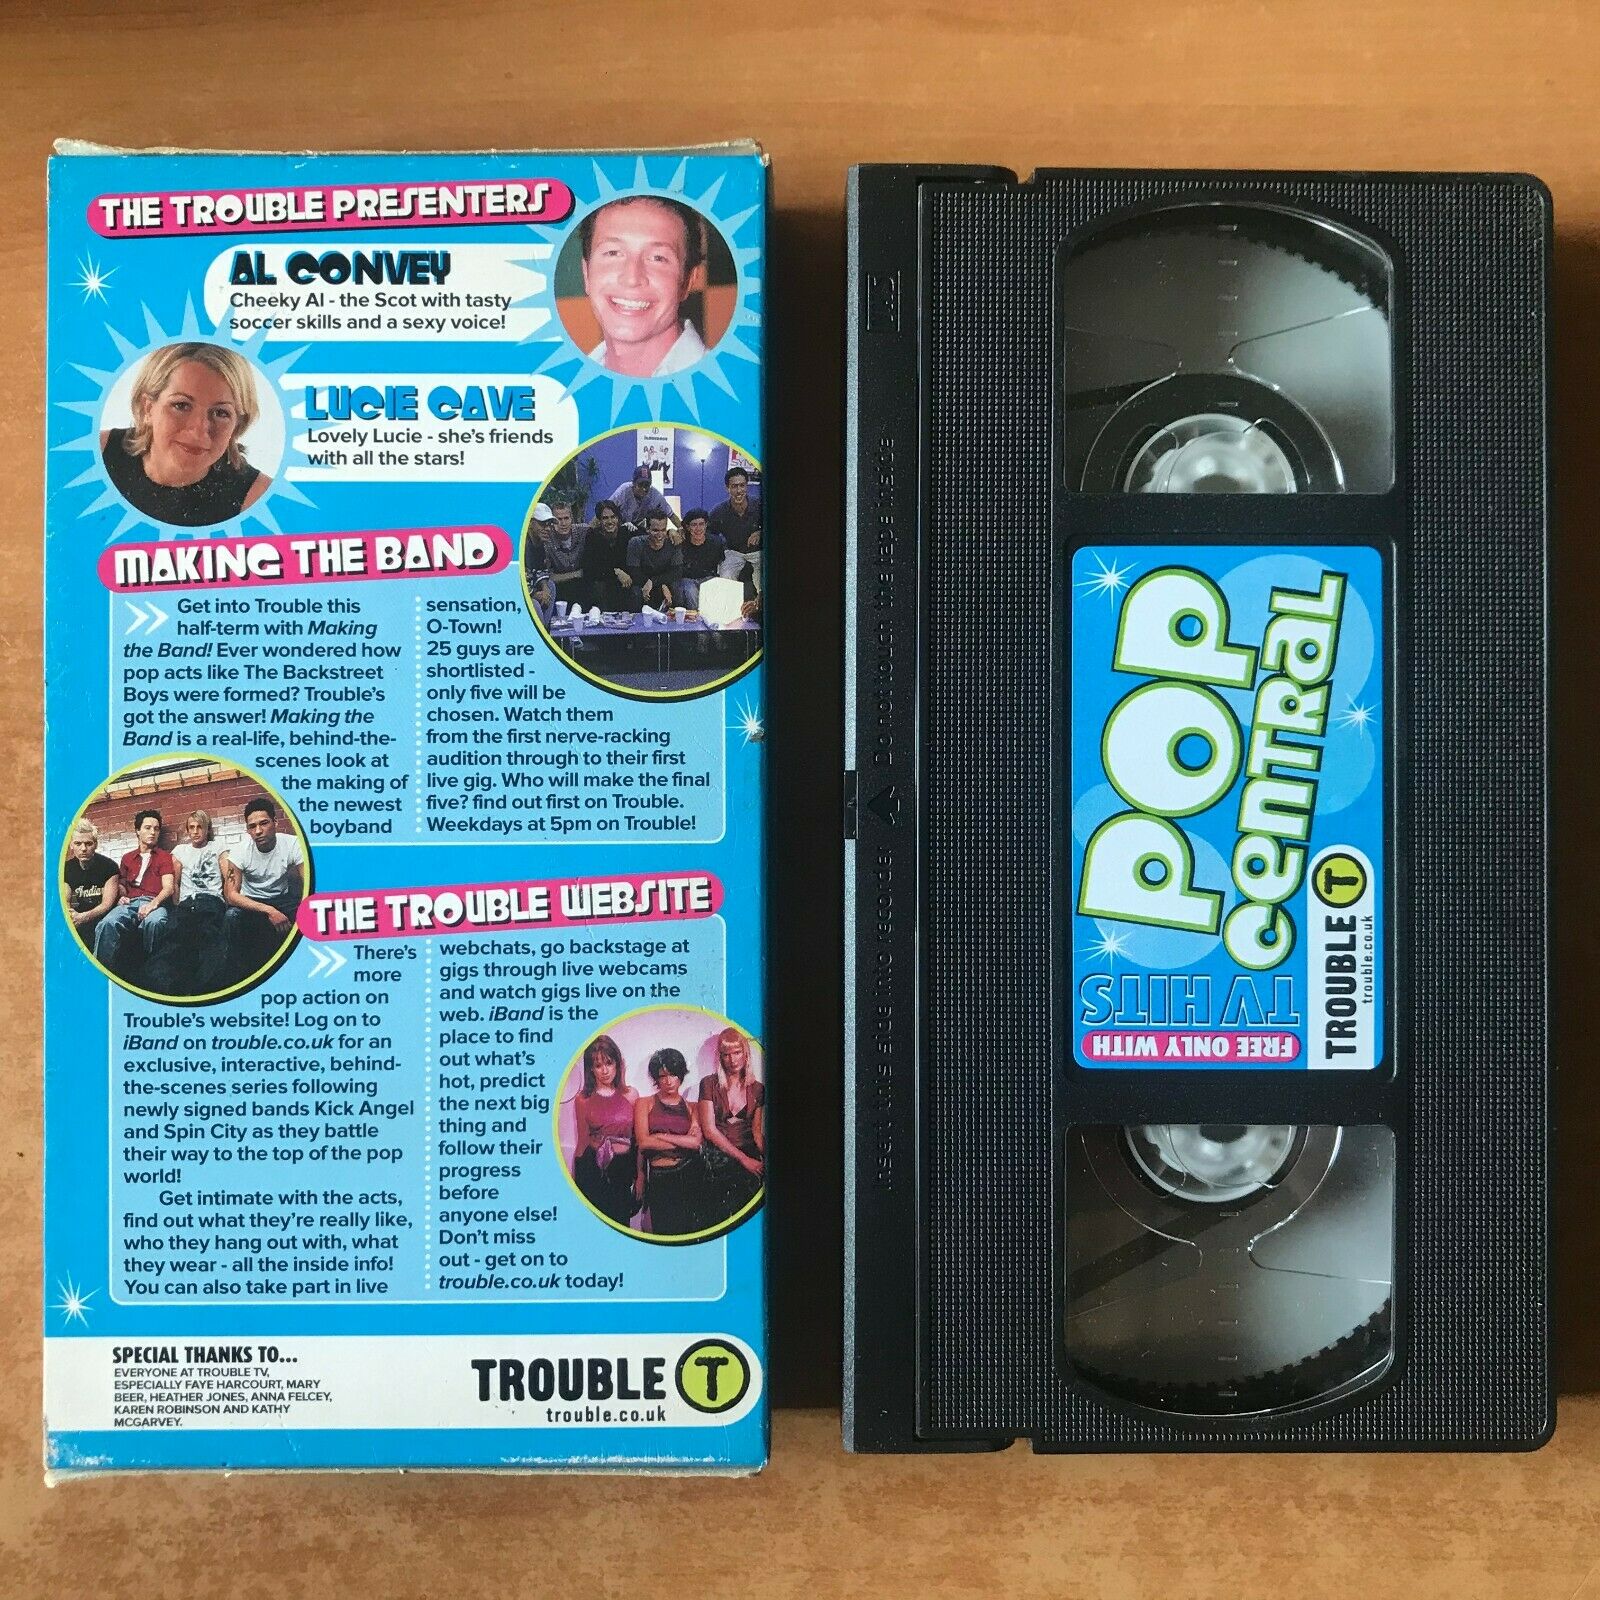 Pop Central; [TV Hits] Carton Box - Britney Spears - Westlife - Music - Pal VHS-